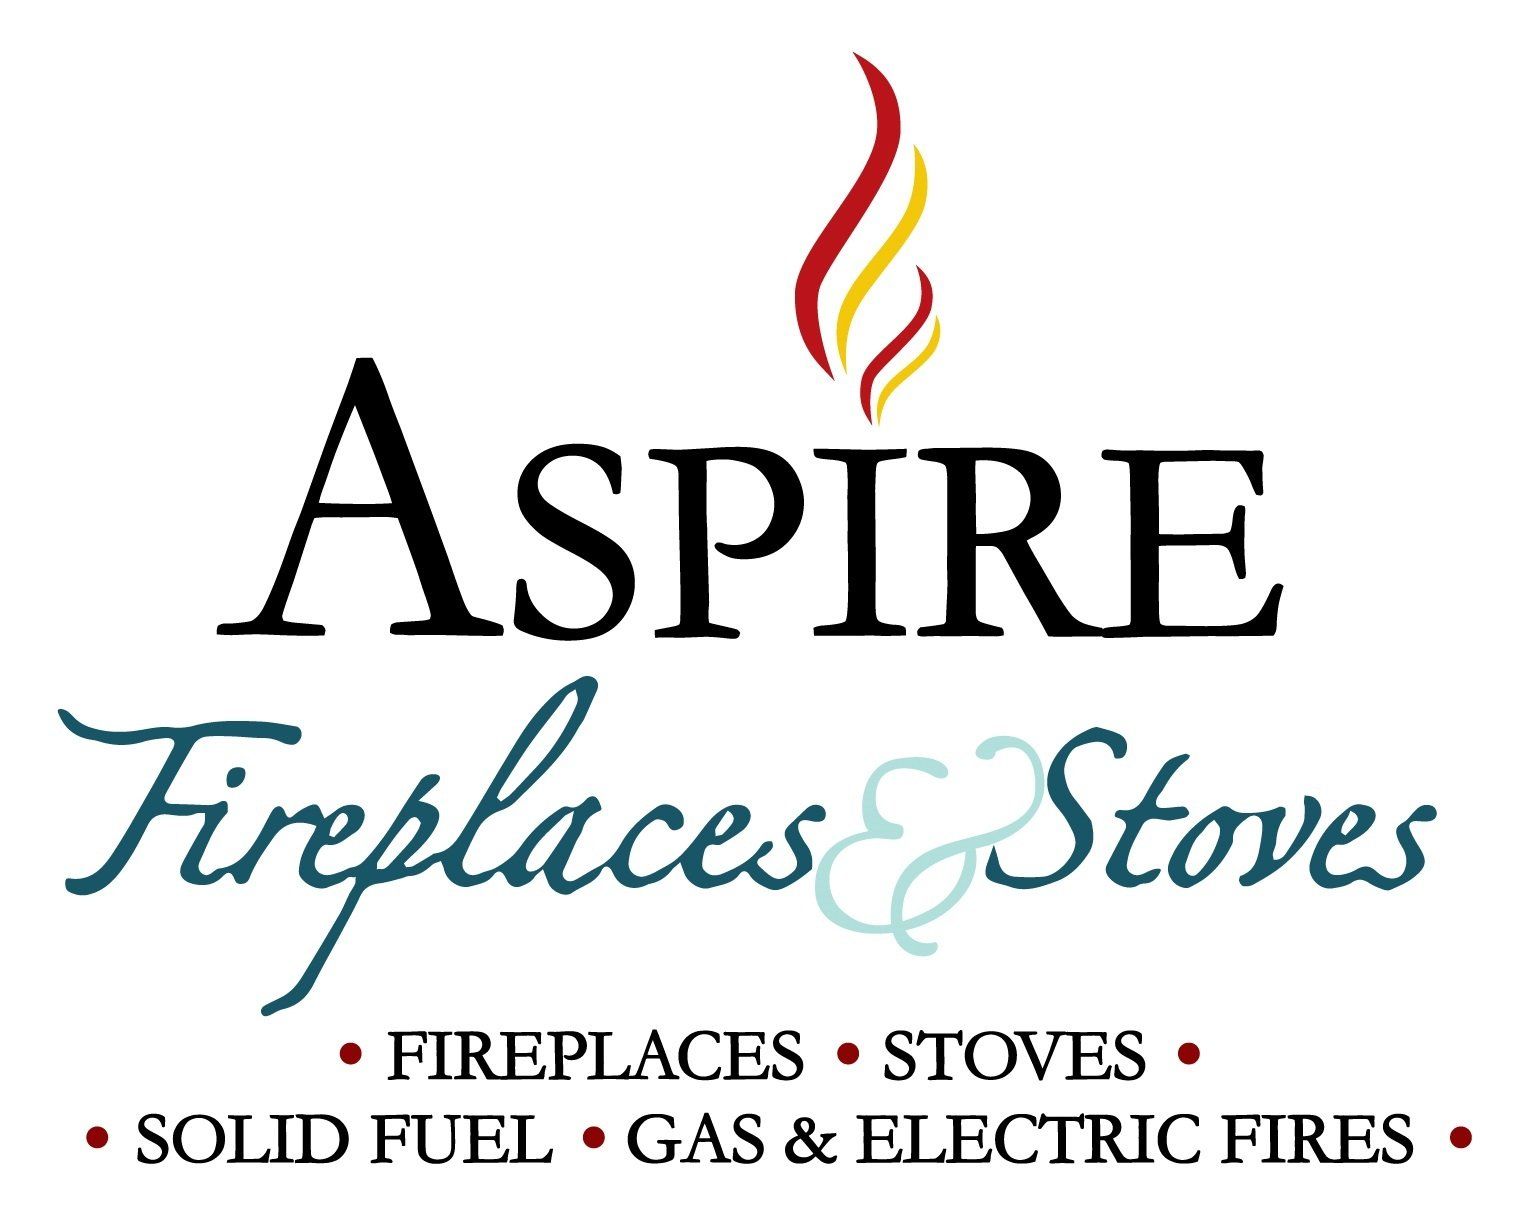 Aspire Fireplaces & Stoves